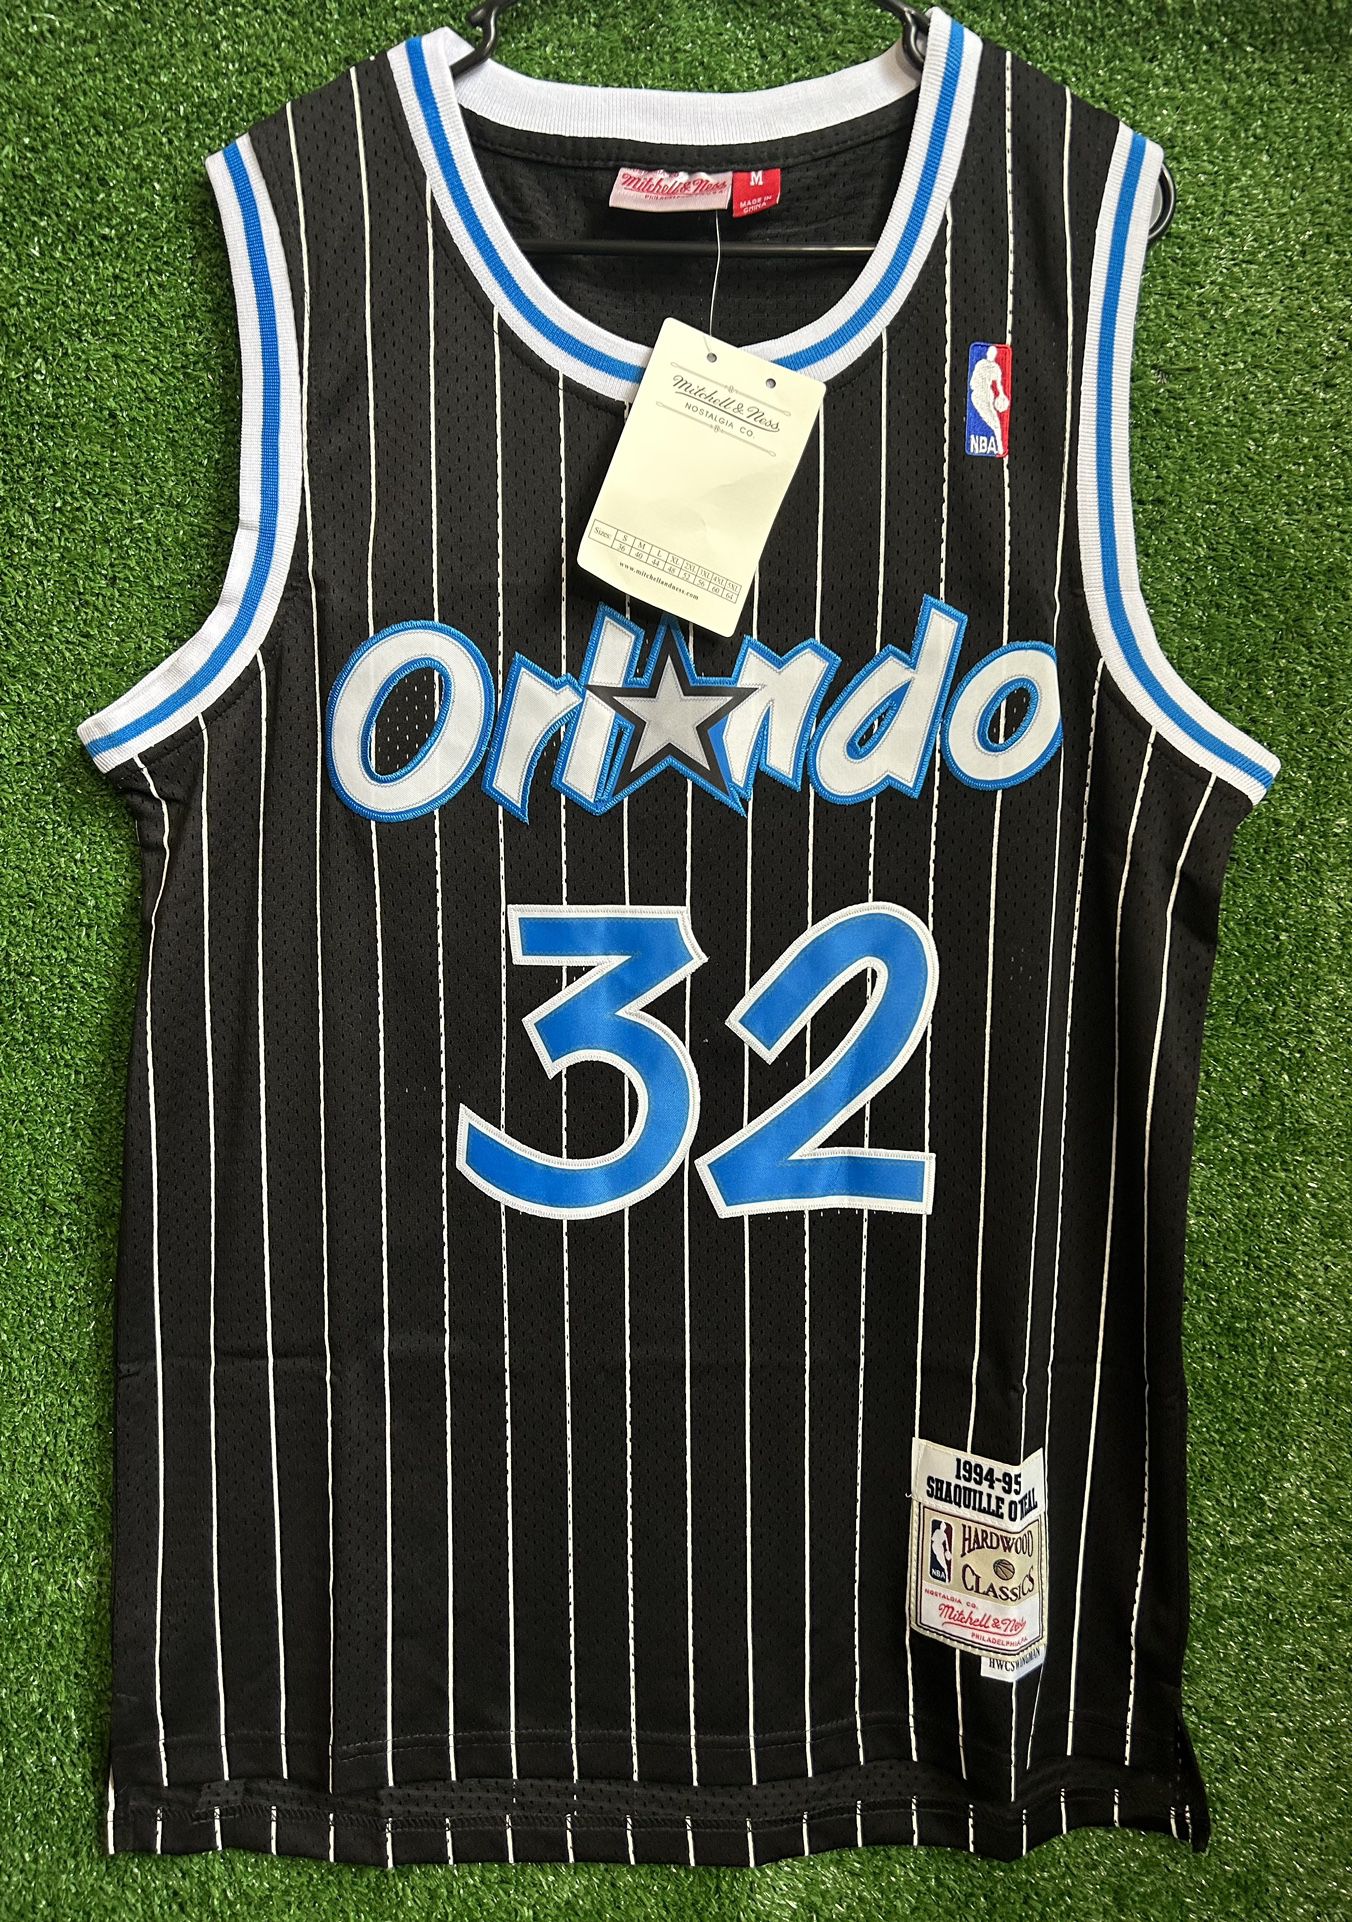 SHAQUILLE O’NEAL ORLANDO MAGIC MITCHELL & NESS JERSEY BRAND NEW WITH TAGS SIZES LARGE AND XL AVAILABLE